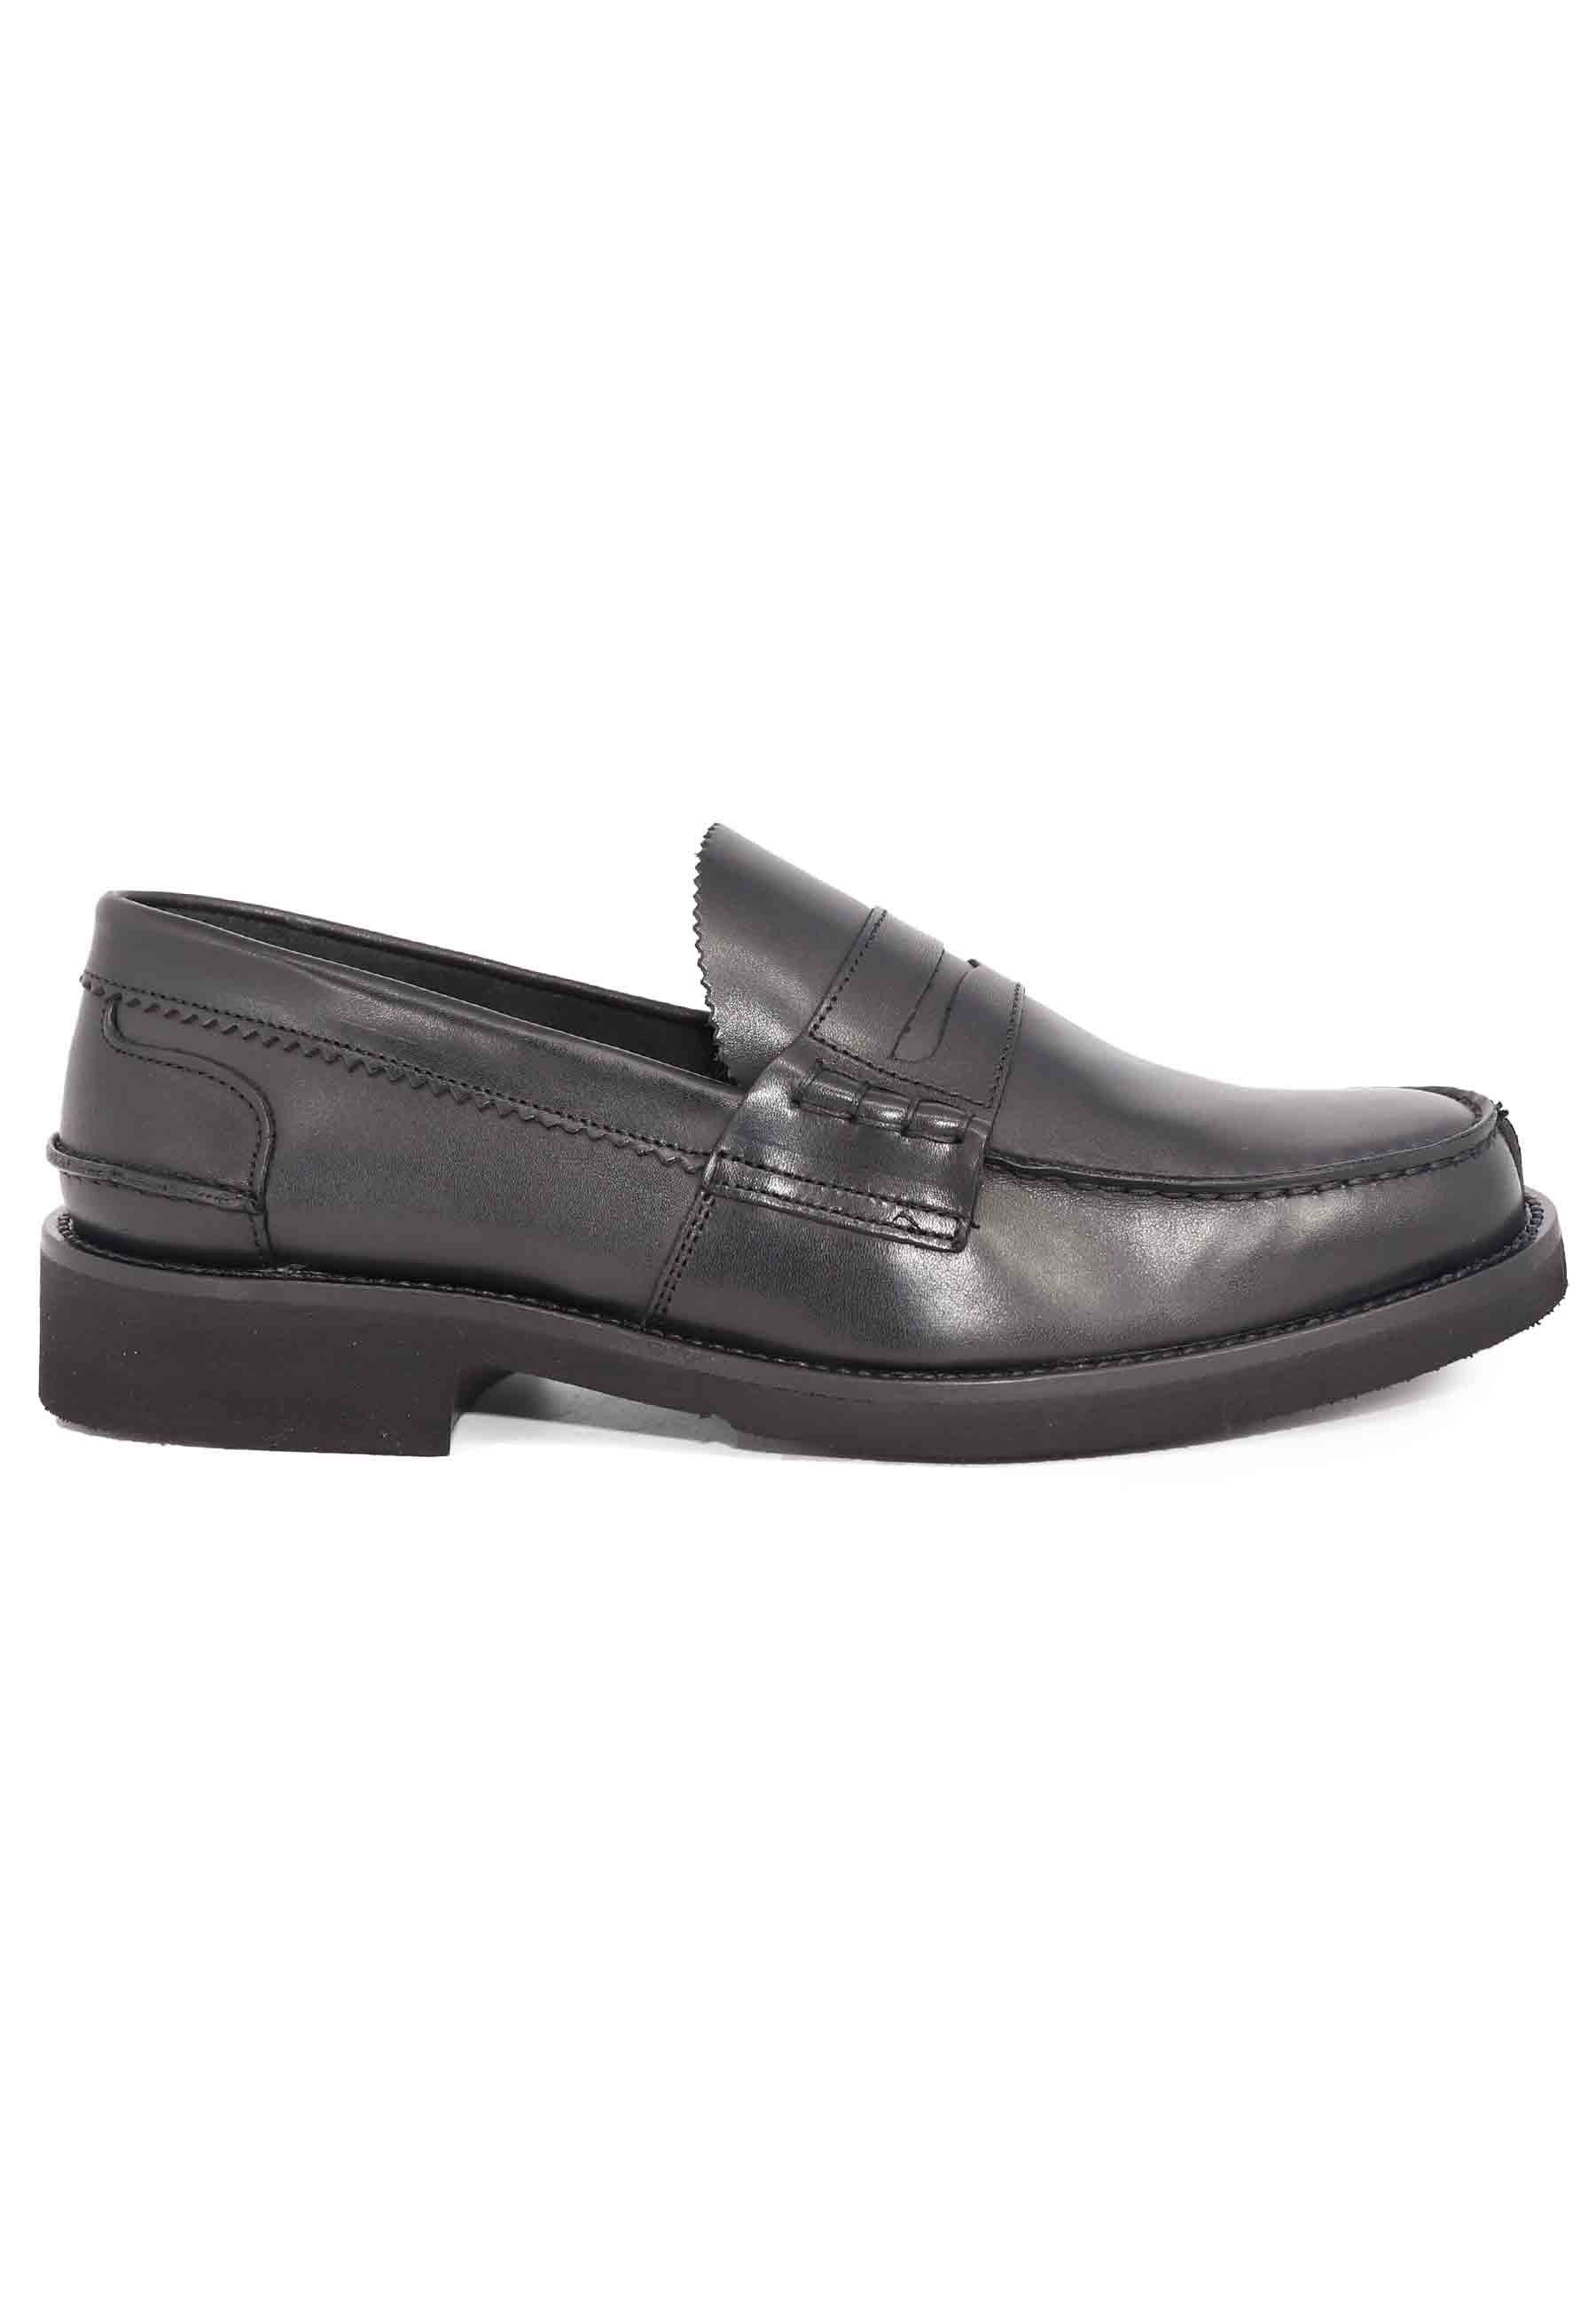 Men's black leather loafers with extra light rubber sole